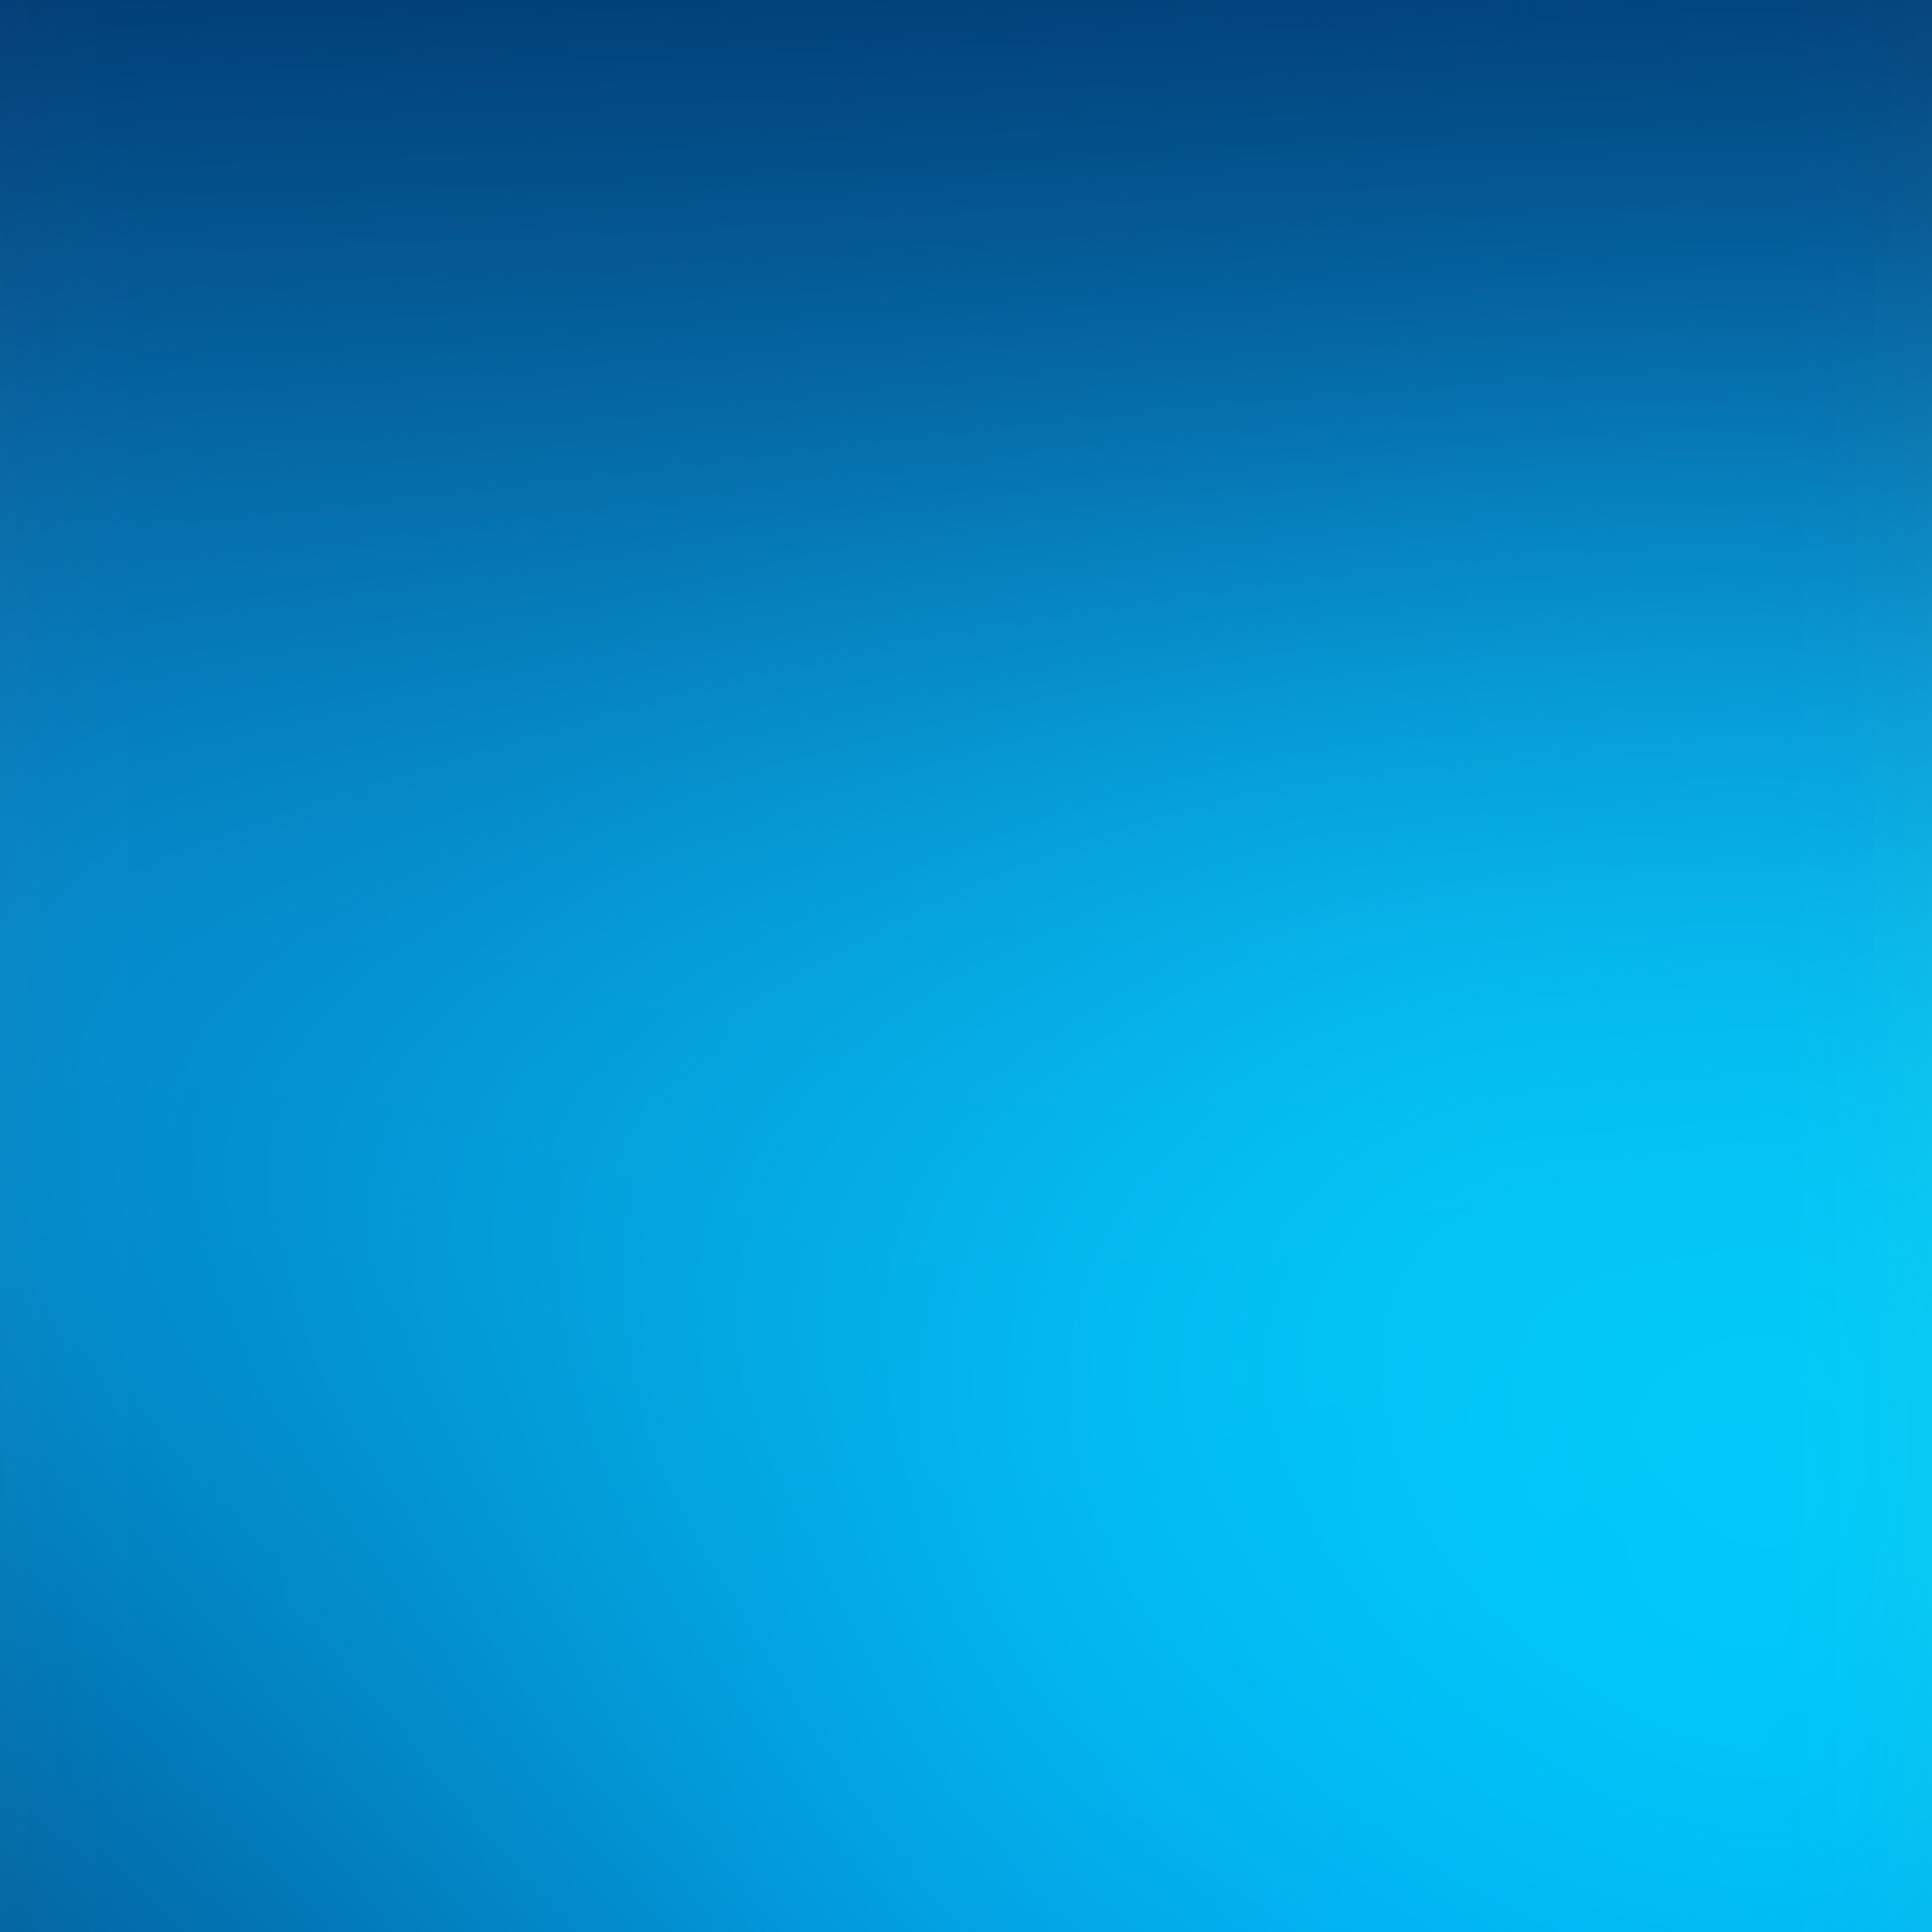 Blue And Light Blue Background - HD Wallpaper 